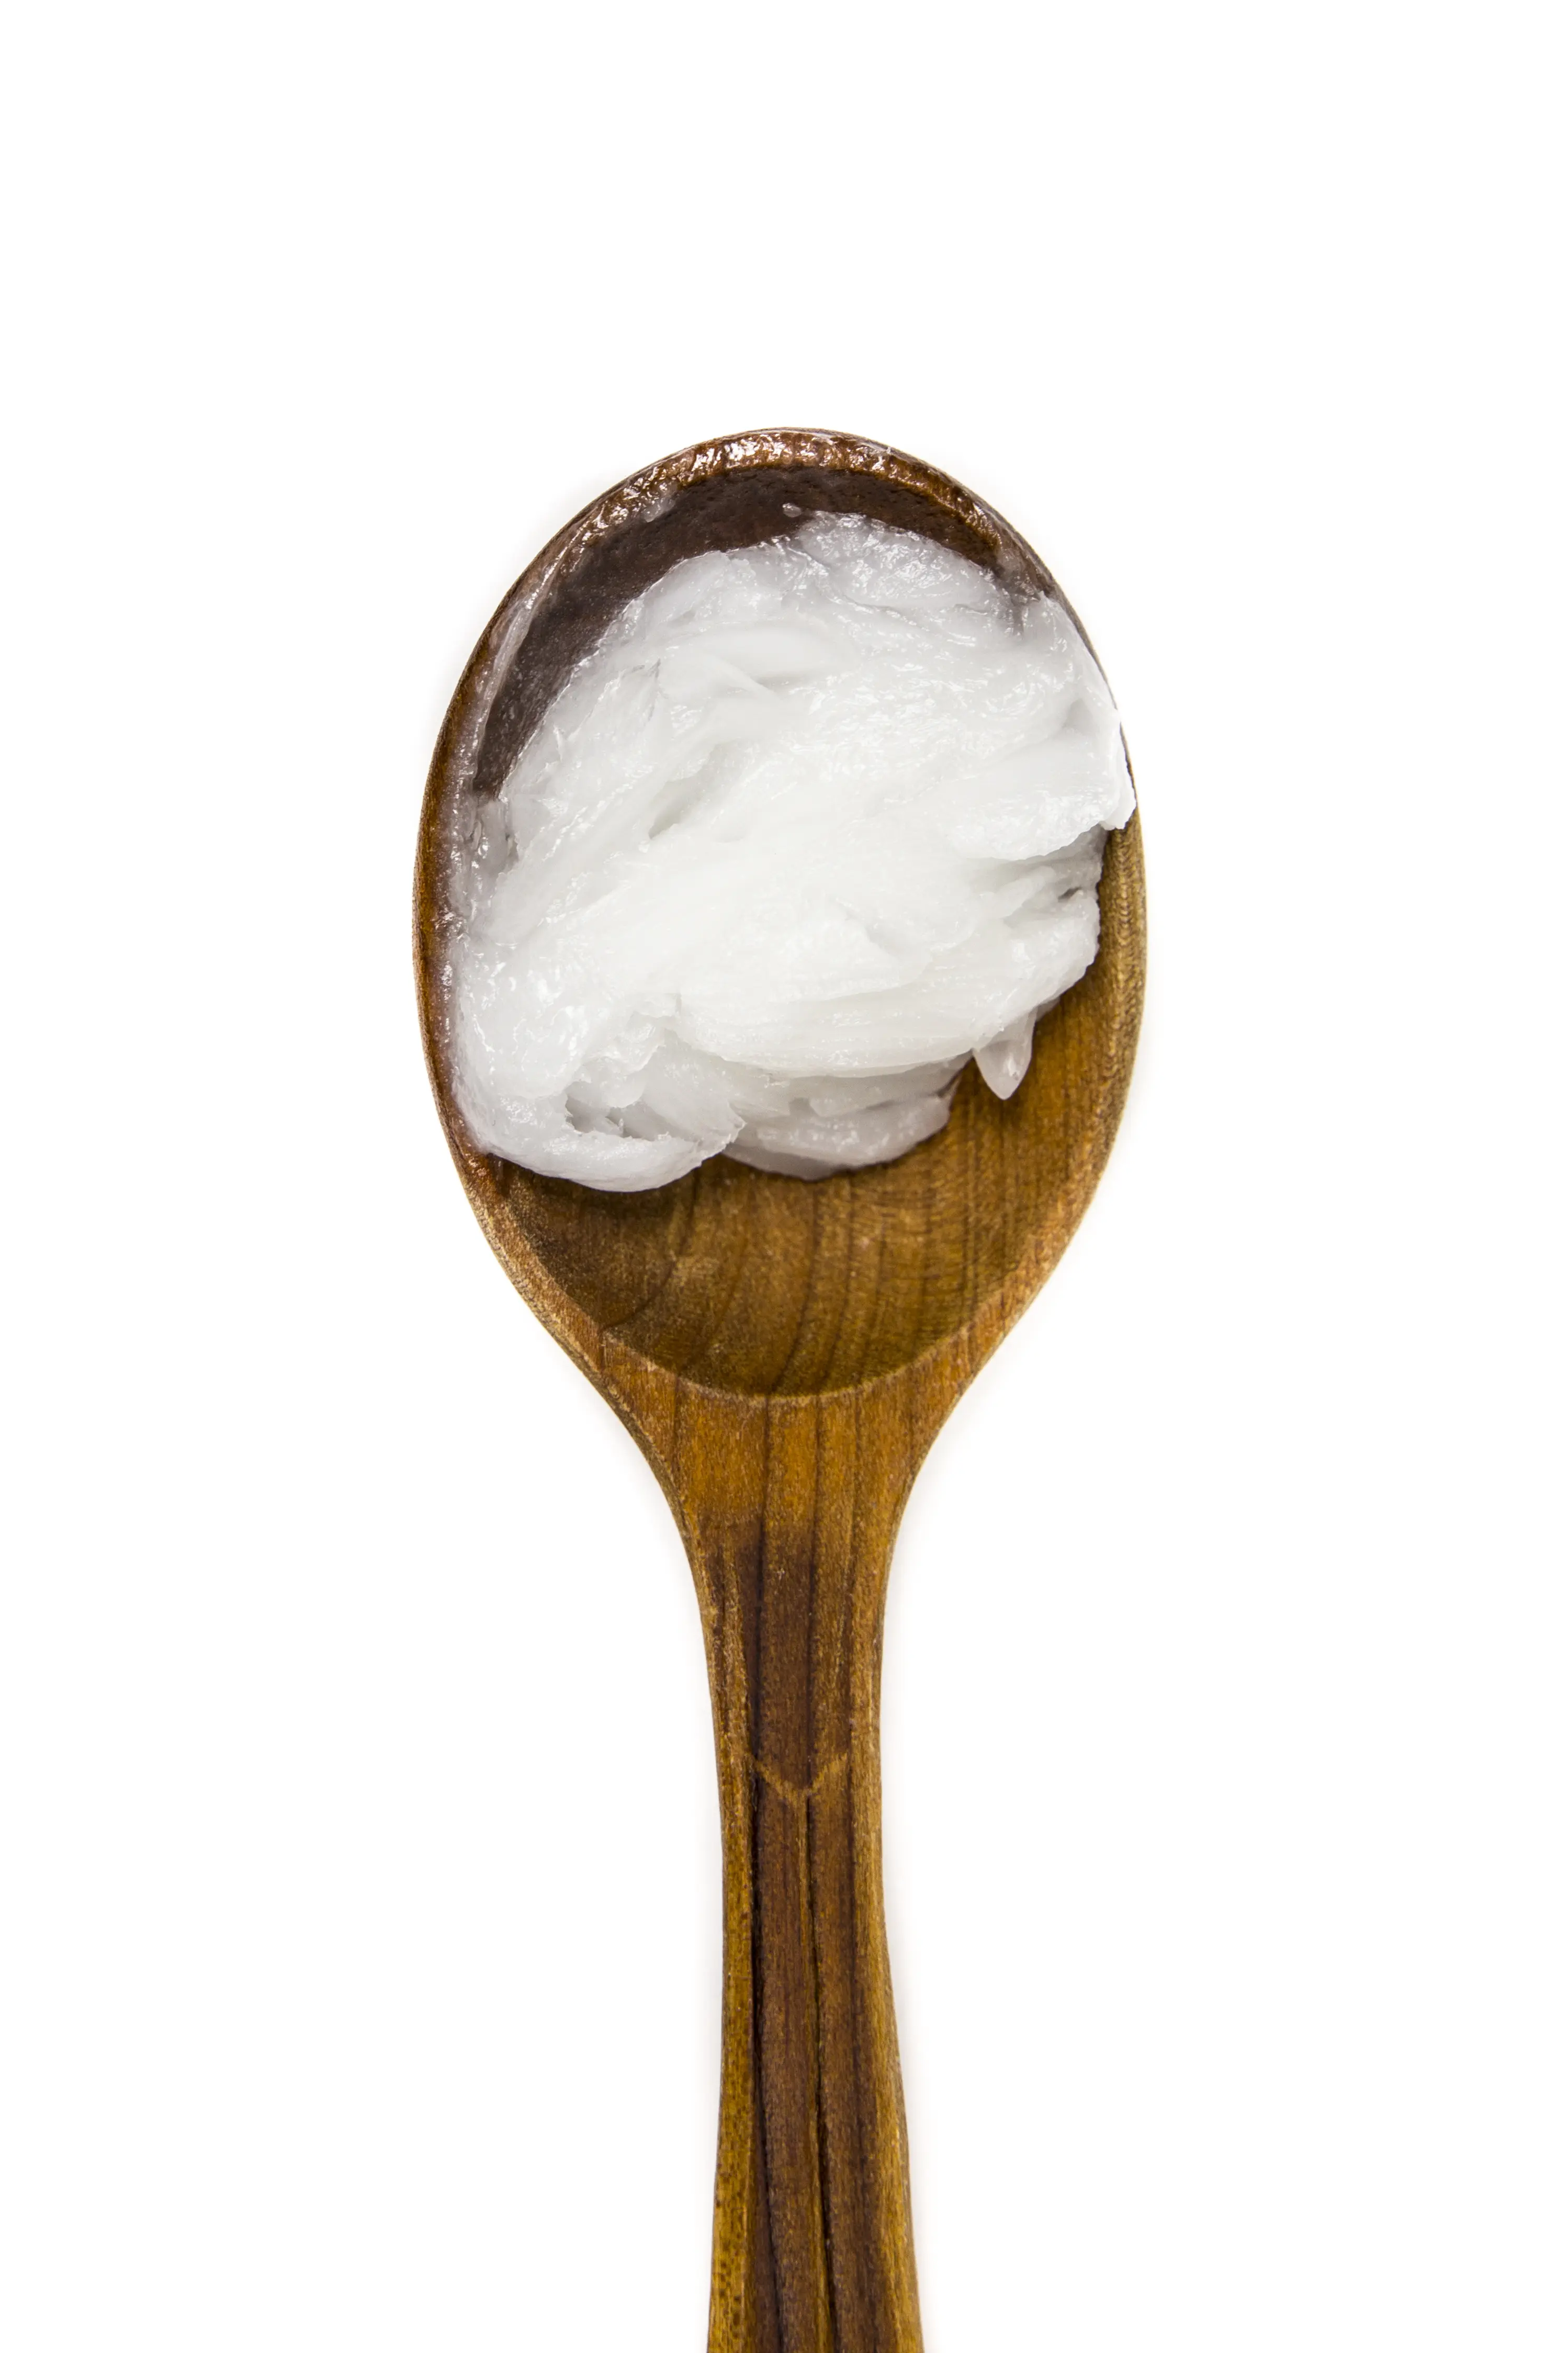 Coconut on a wooden spoon against an isolated white background.